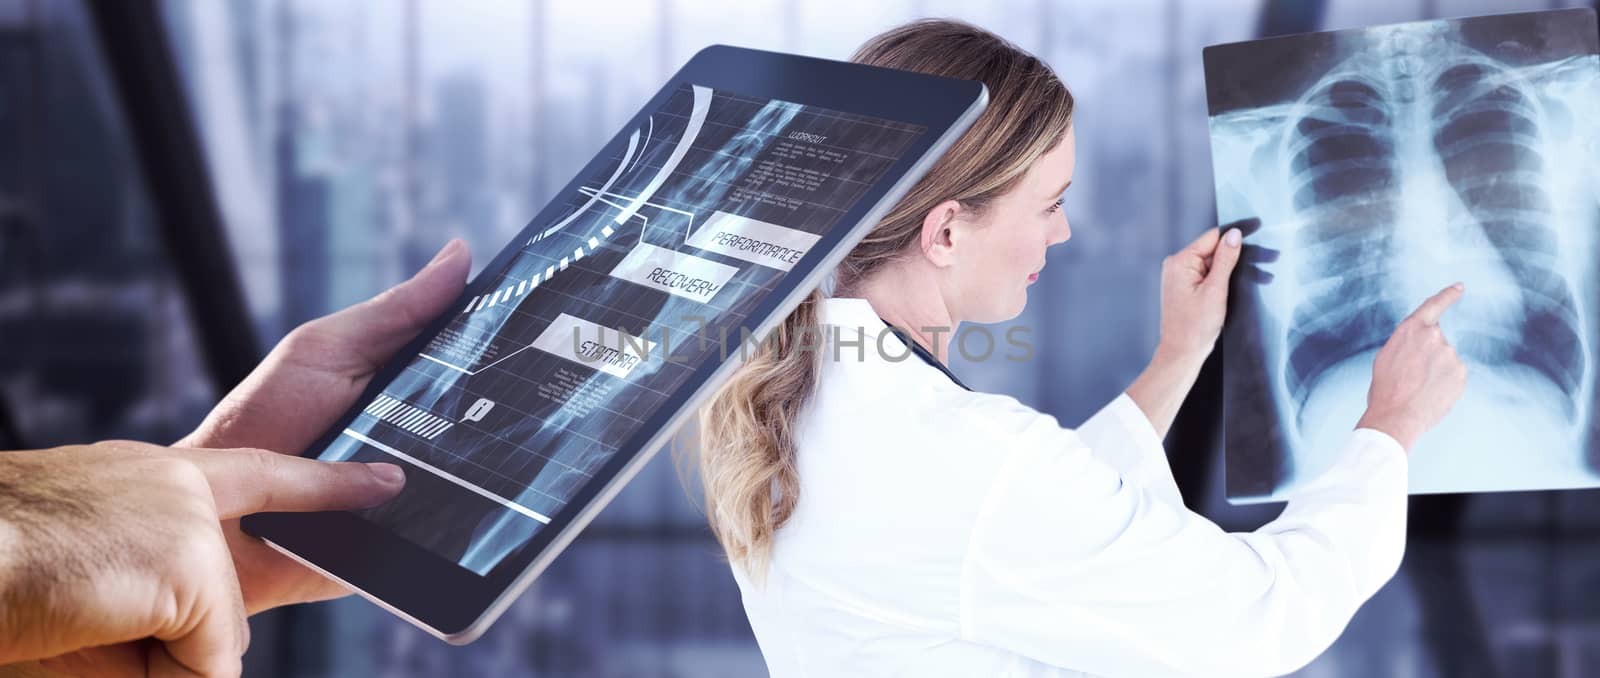 Composite image of man using tablet pc by Wavebreakmedia